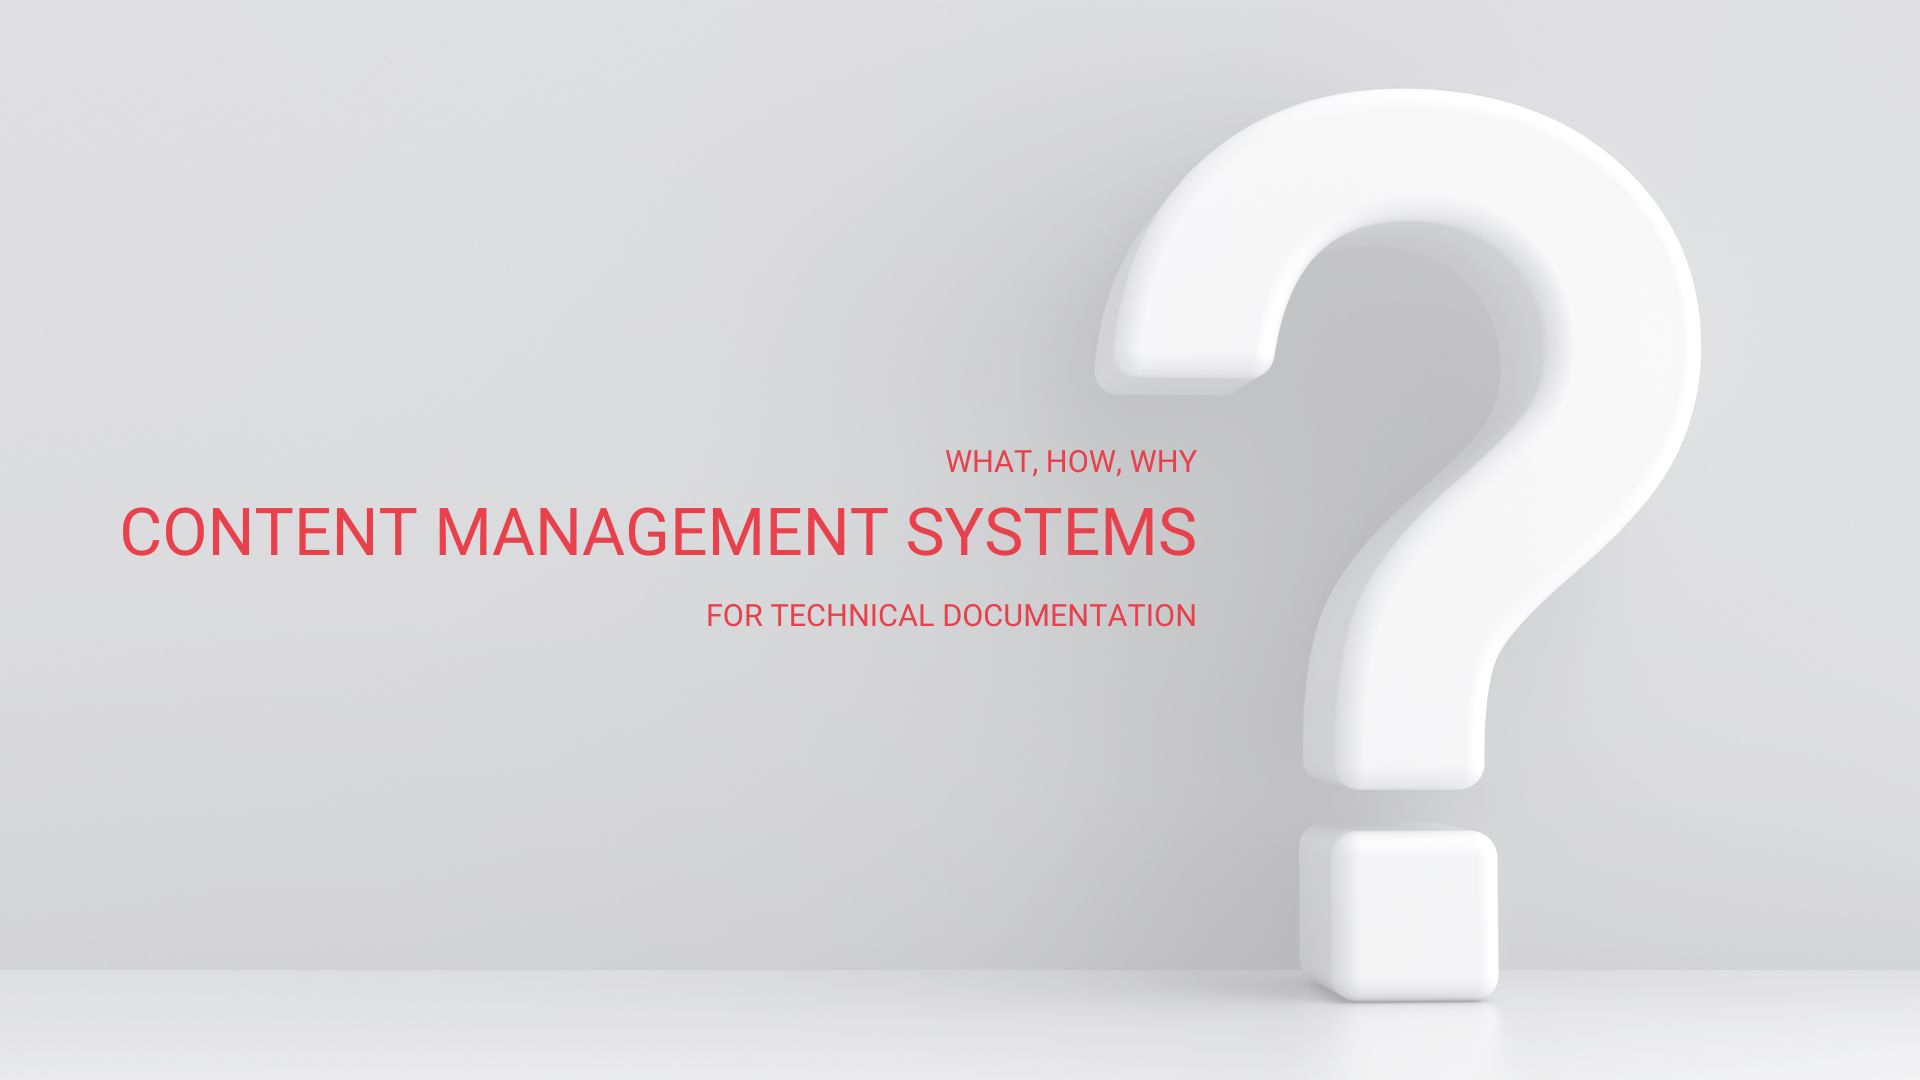 Content Management Systems for Technical Documentation – What, How and Why?